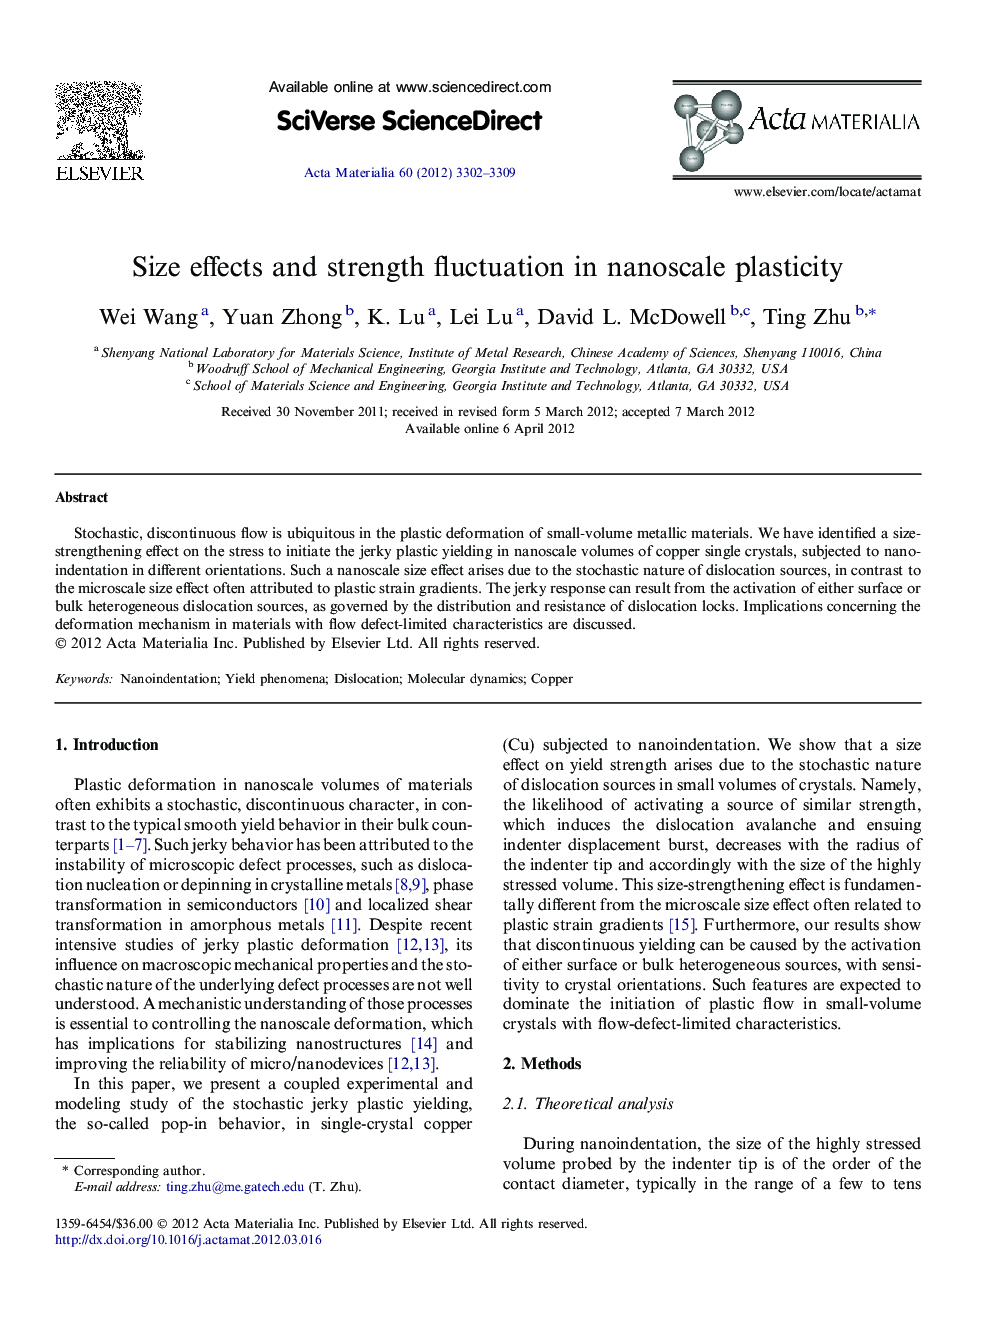 Size effects and strength fluctuation in nanoscale plasticity